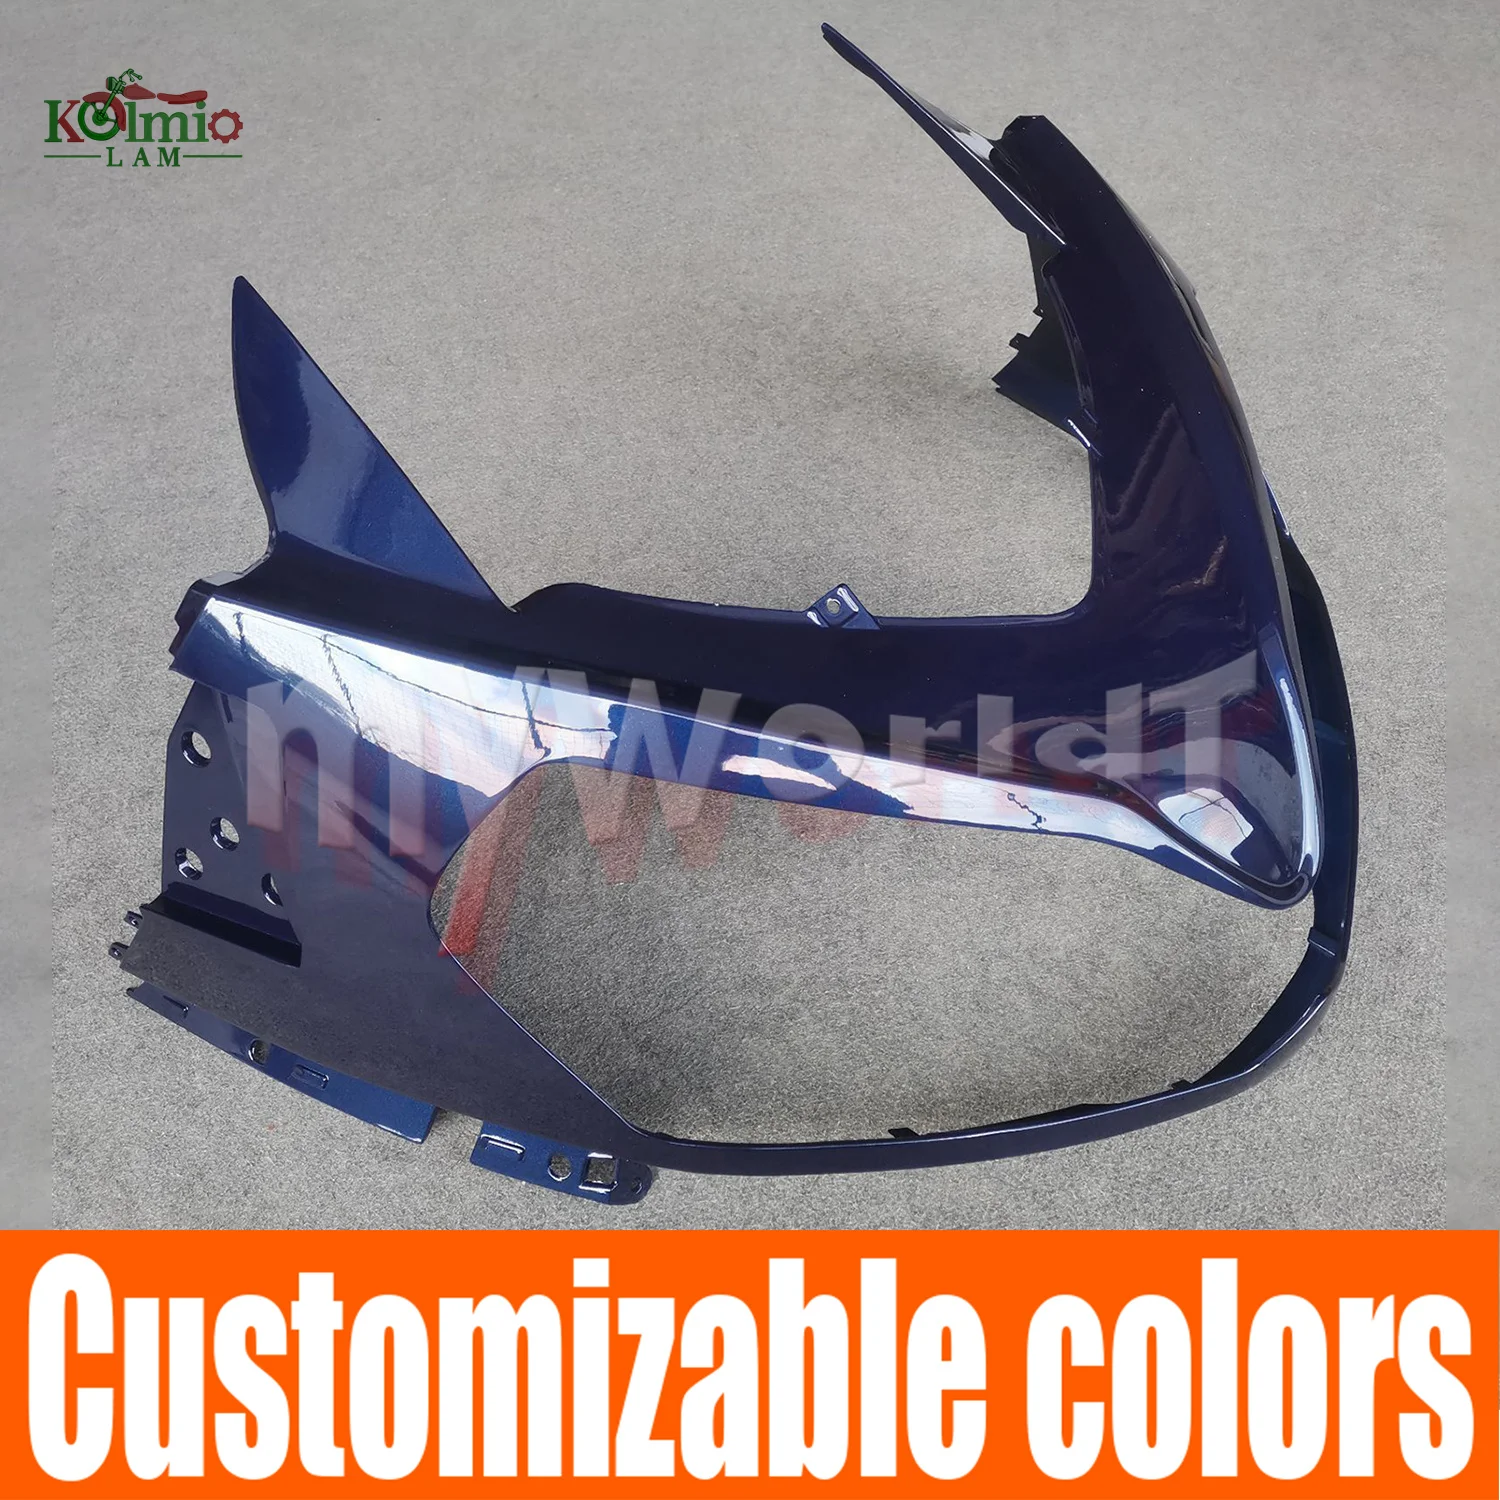 

Fit For KAWASAKI GTR1400 ZG1400 2006 - 2012 Motorcycle Accessories Front Upper Fairing Headlight Cowl Nose GTR 1400 2009 2010